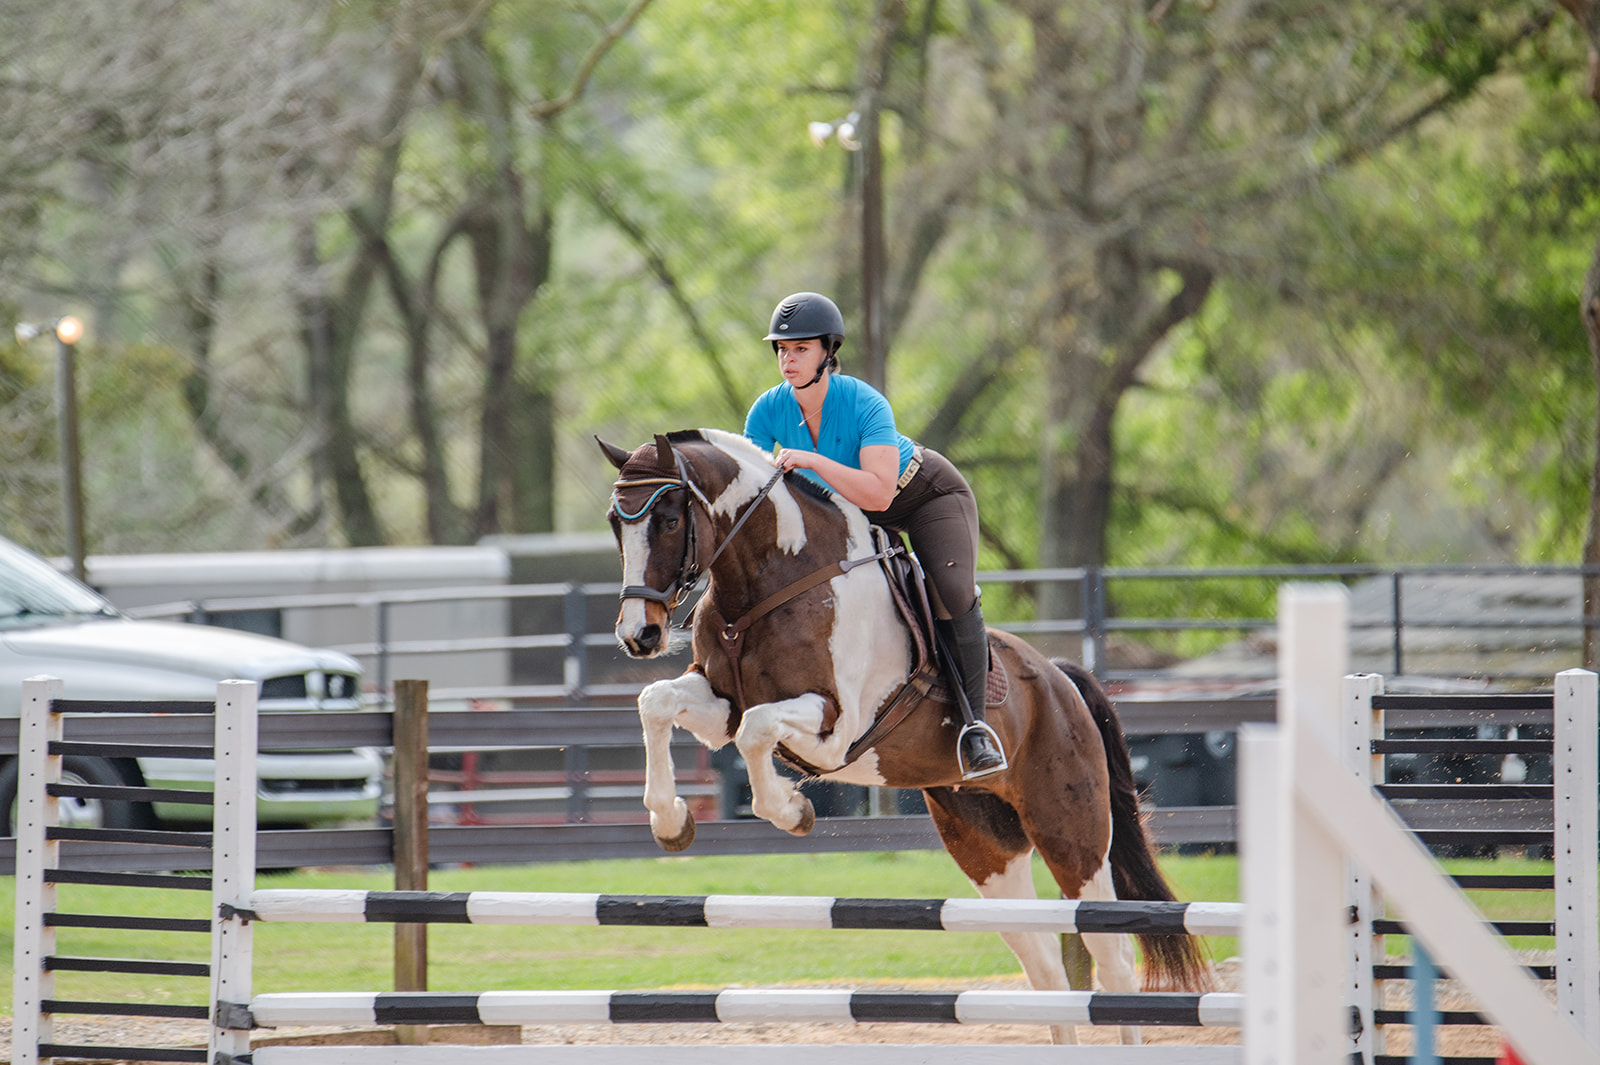 Equestrian competing in Show Jumping during Eventing competition in Tallahassee, FL at Mahan Farm. calicoandchrome.com